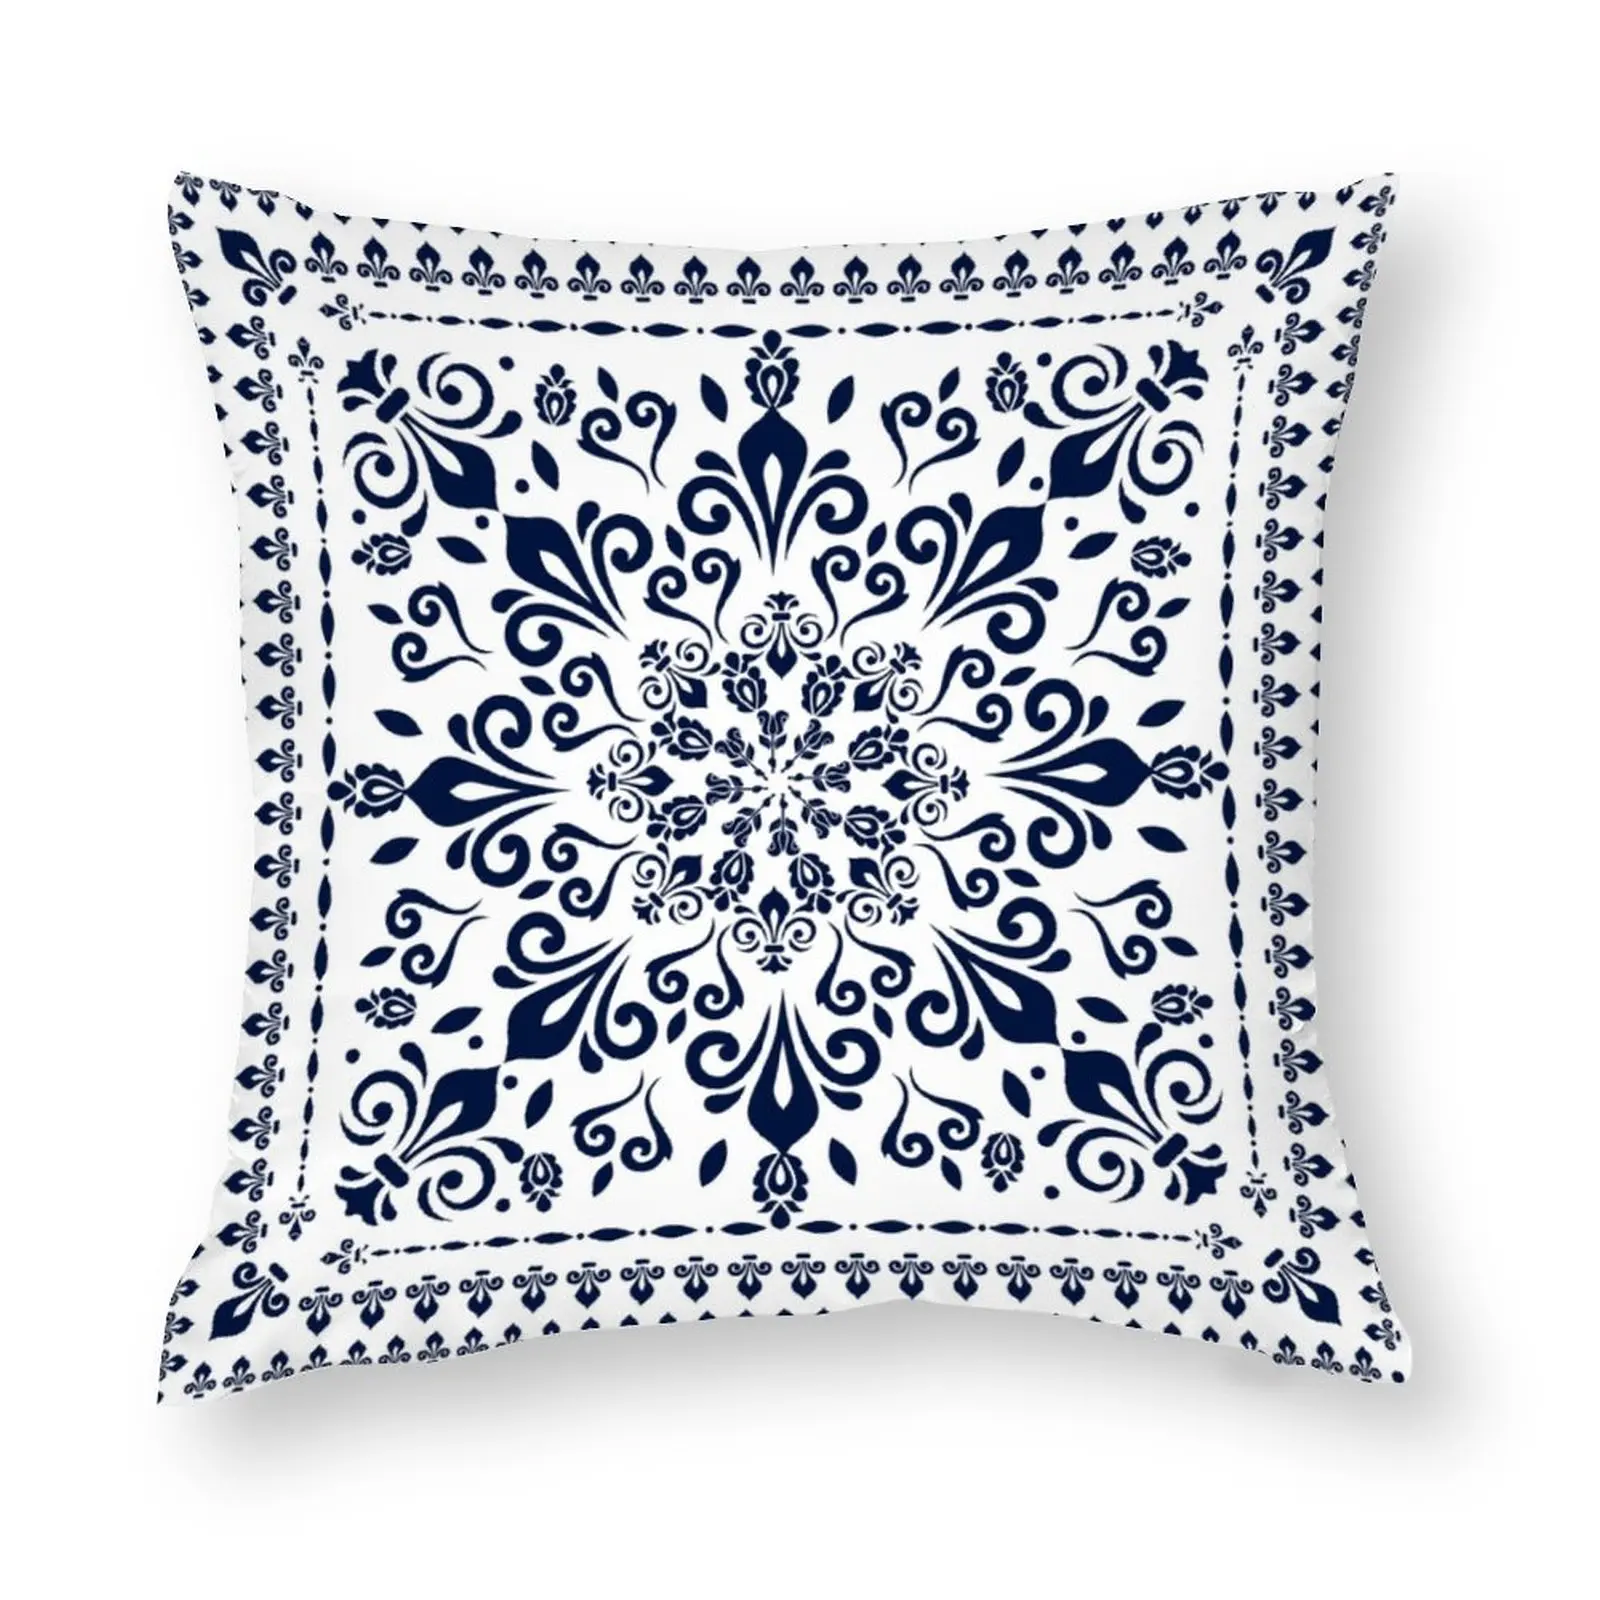 

Throw Pillow Cover 18x18 Inch Oriental Damask Blue on White Polyester New Square Slipover Double-Sided Printing Pillowcase